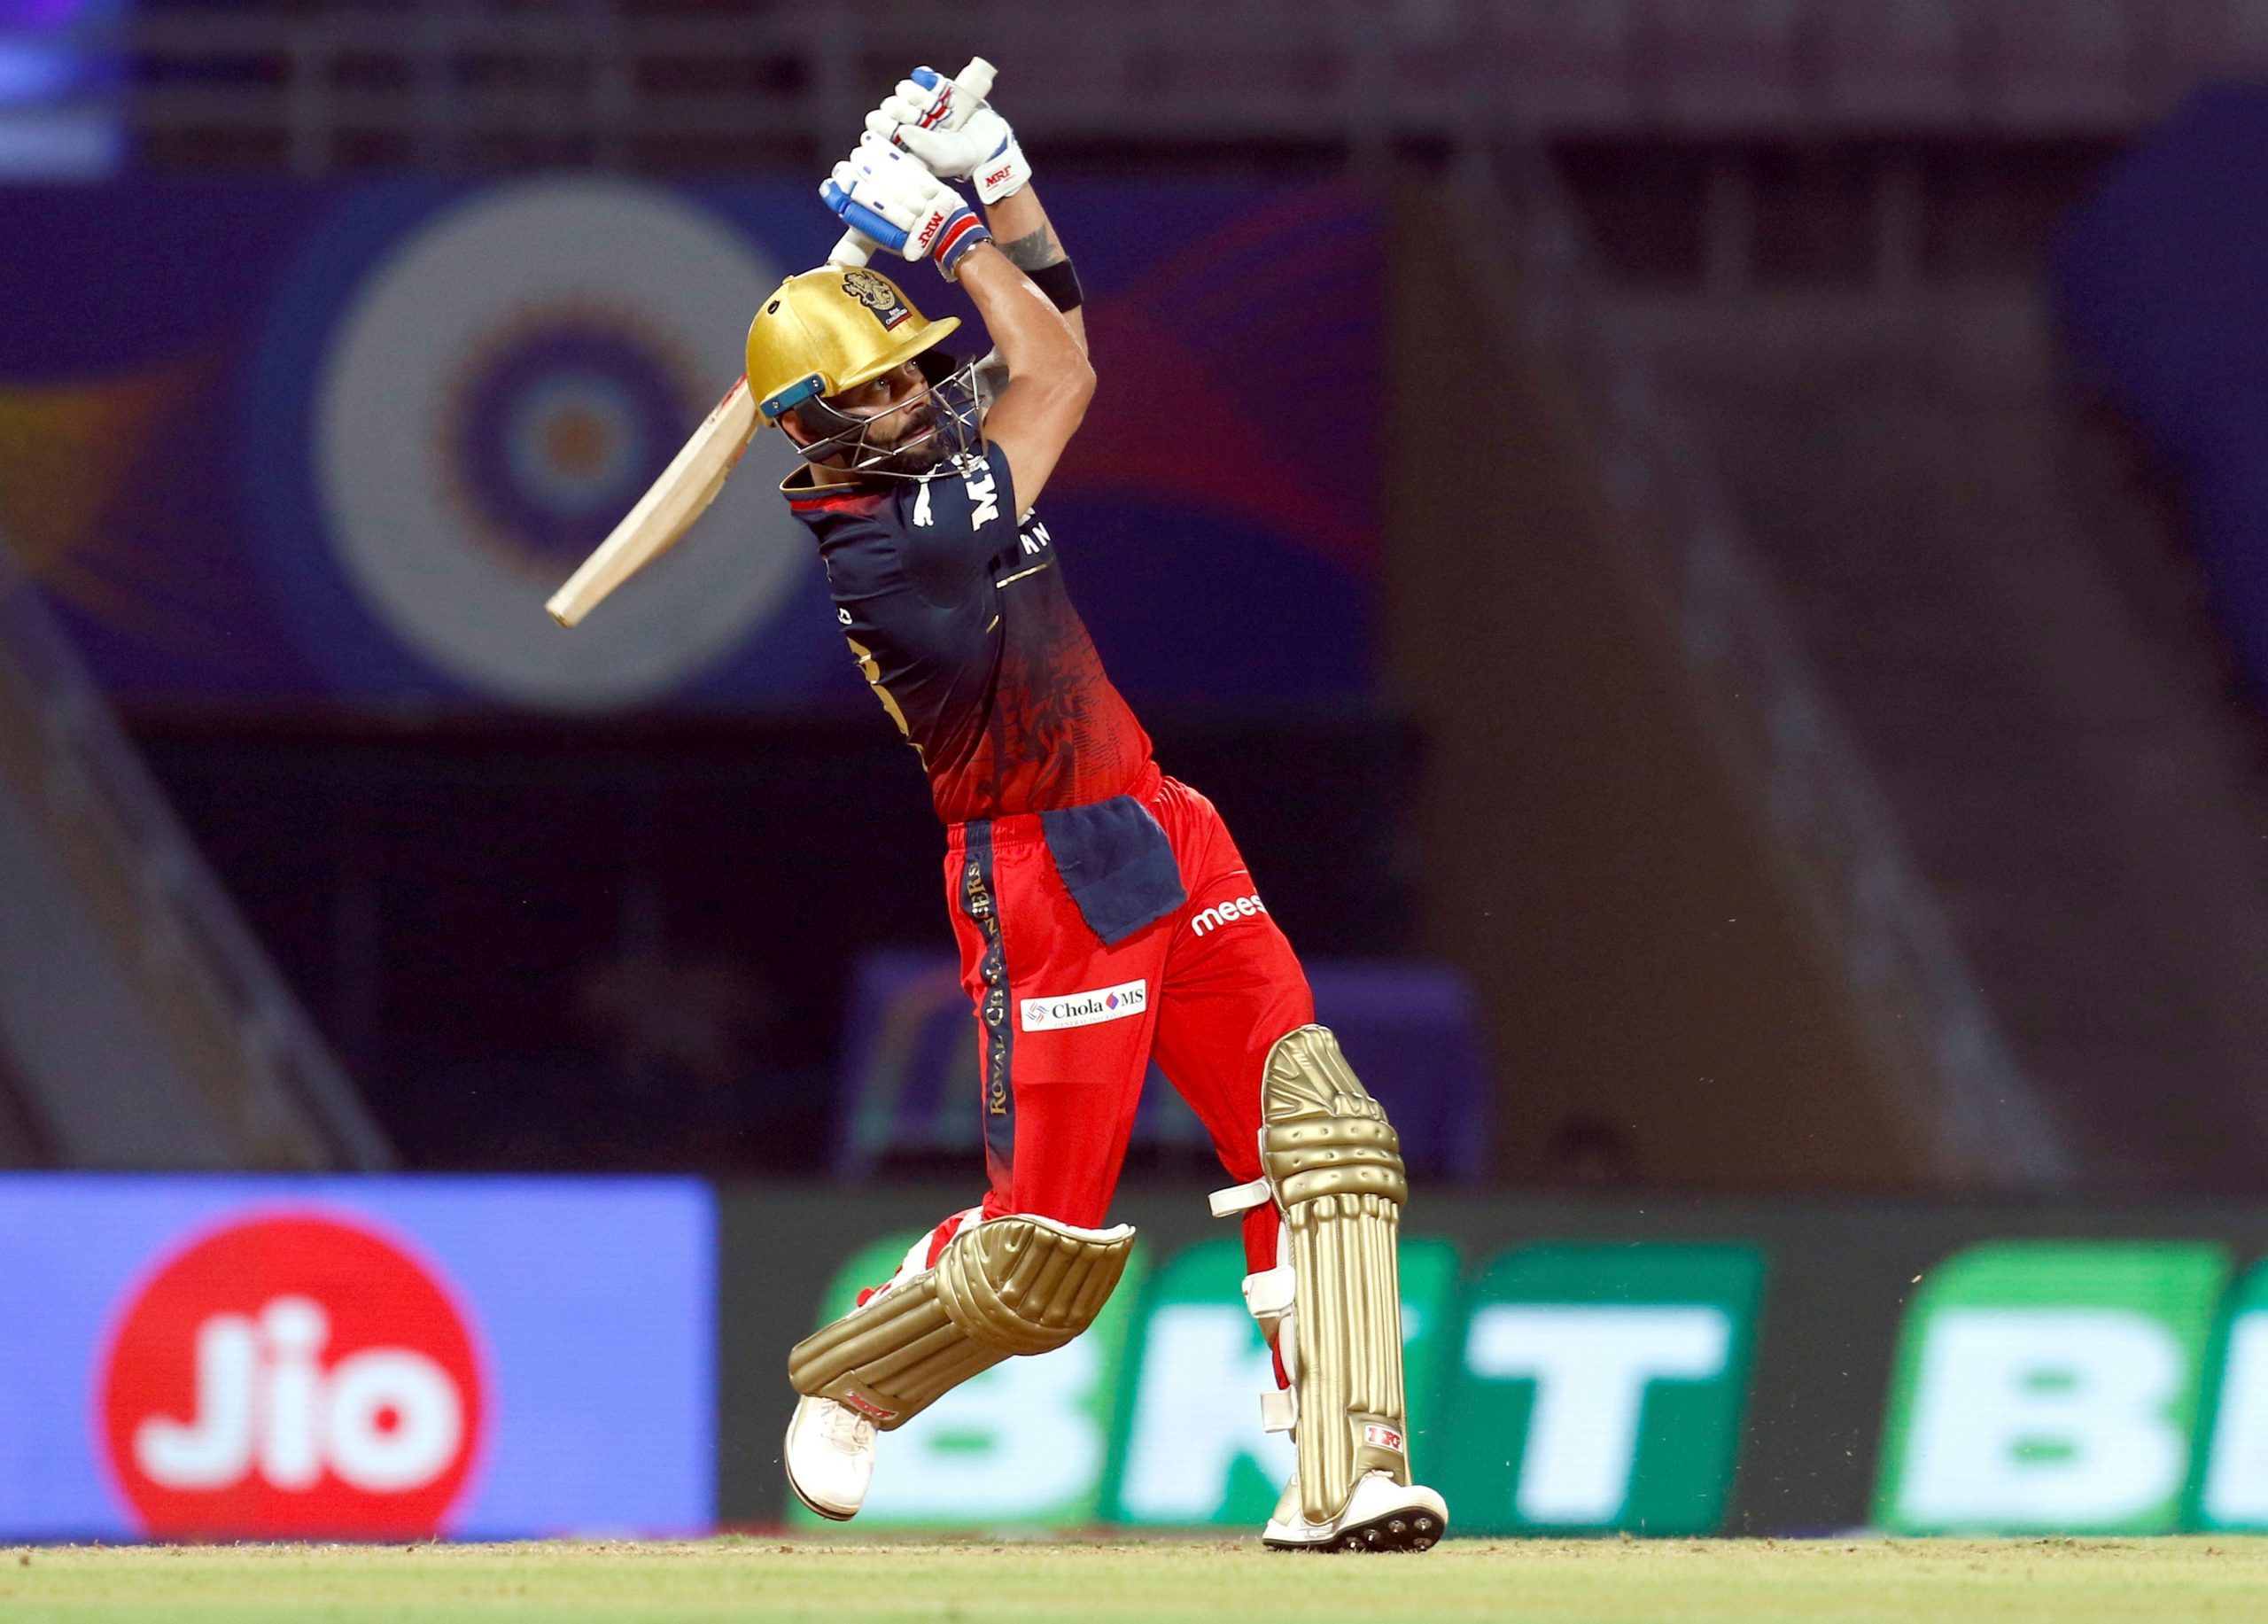 IPL 2022: RCB, KKR set to add new chapter to iconic rivalry